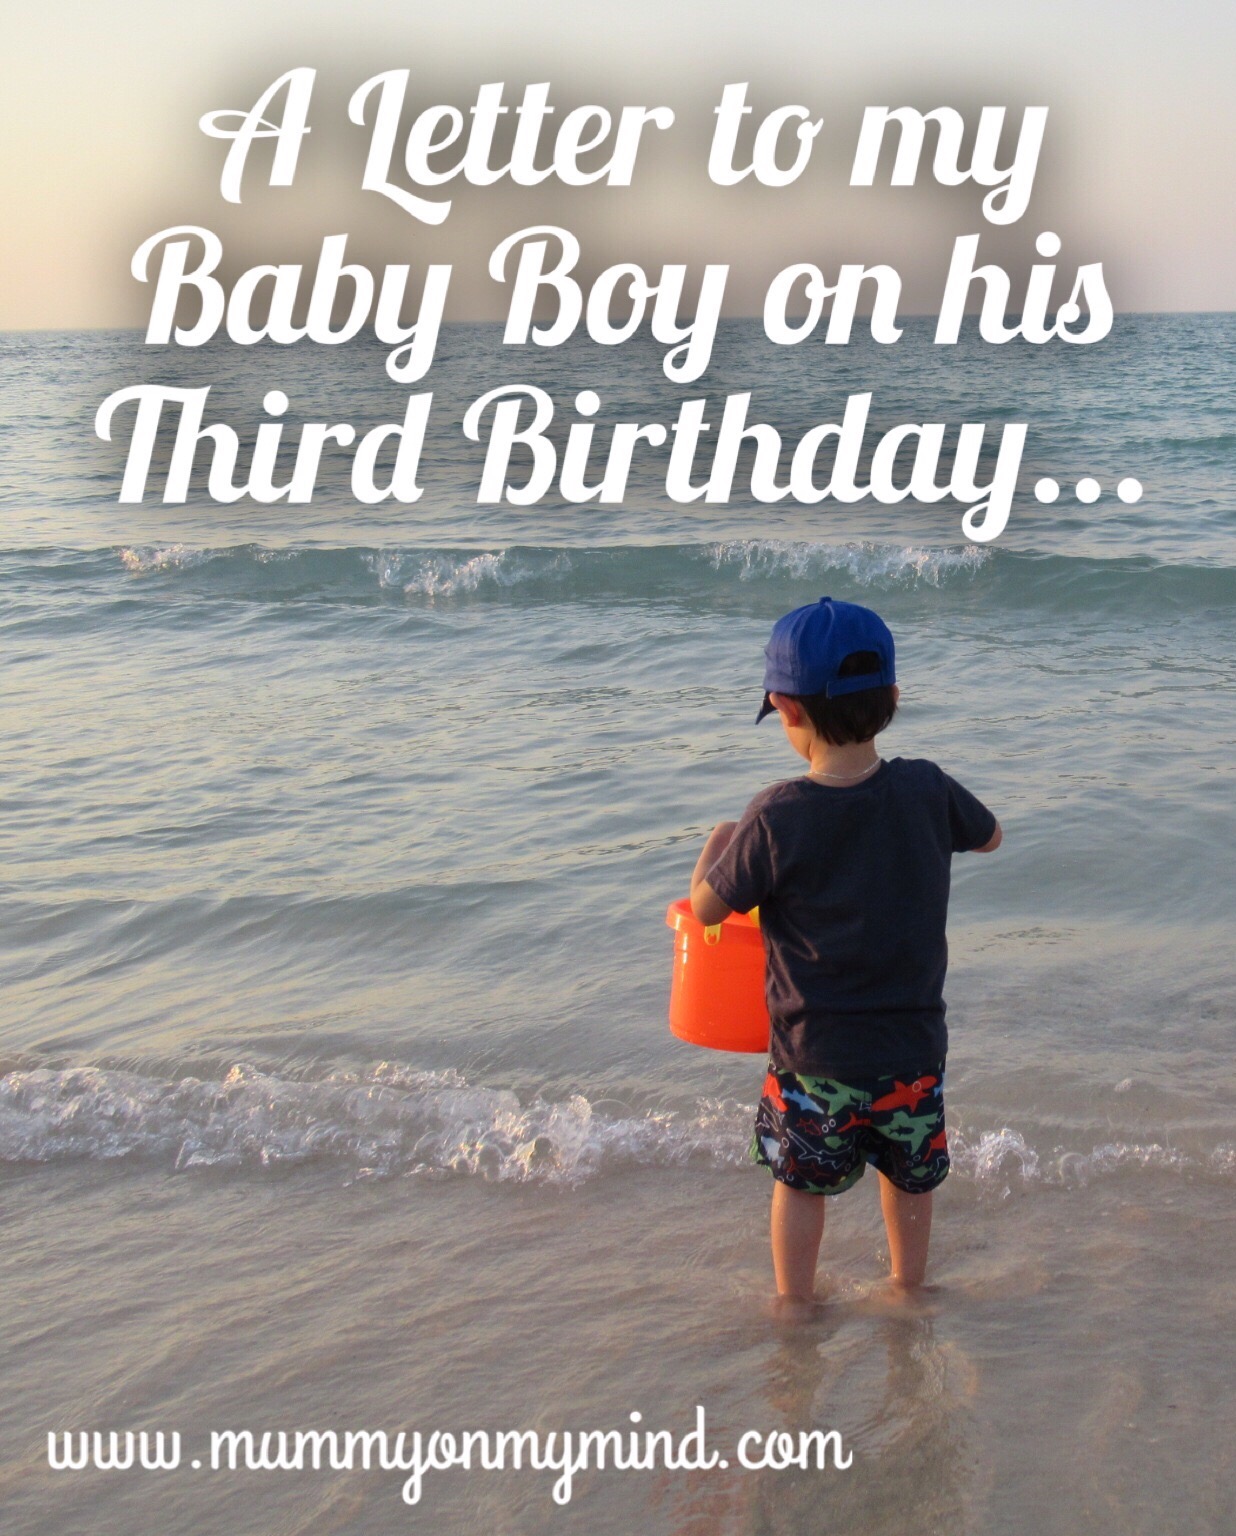 A Letter to my Baby Boy on his Third Birthday…